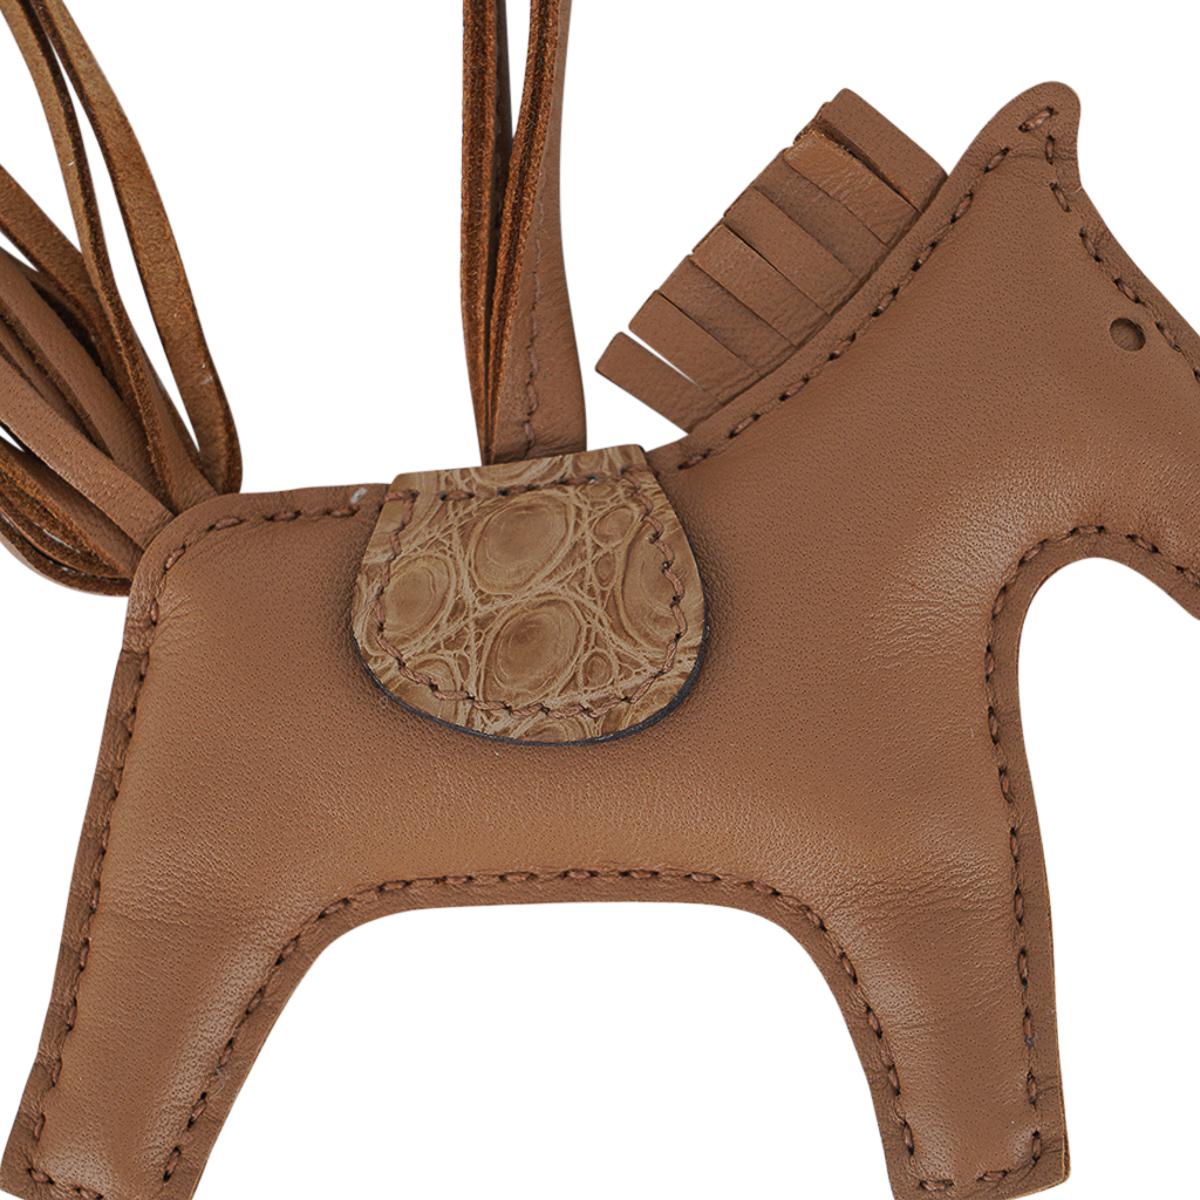 Mightychic offers a  limited edition Hermes Touch PM Rodeo bag charm featured in Chai.
Chai lambskin body, mane and tail is accentuated with matte Chai alligator. 
Charming and playful she easily adorns a myriad bag colors in your fabulous